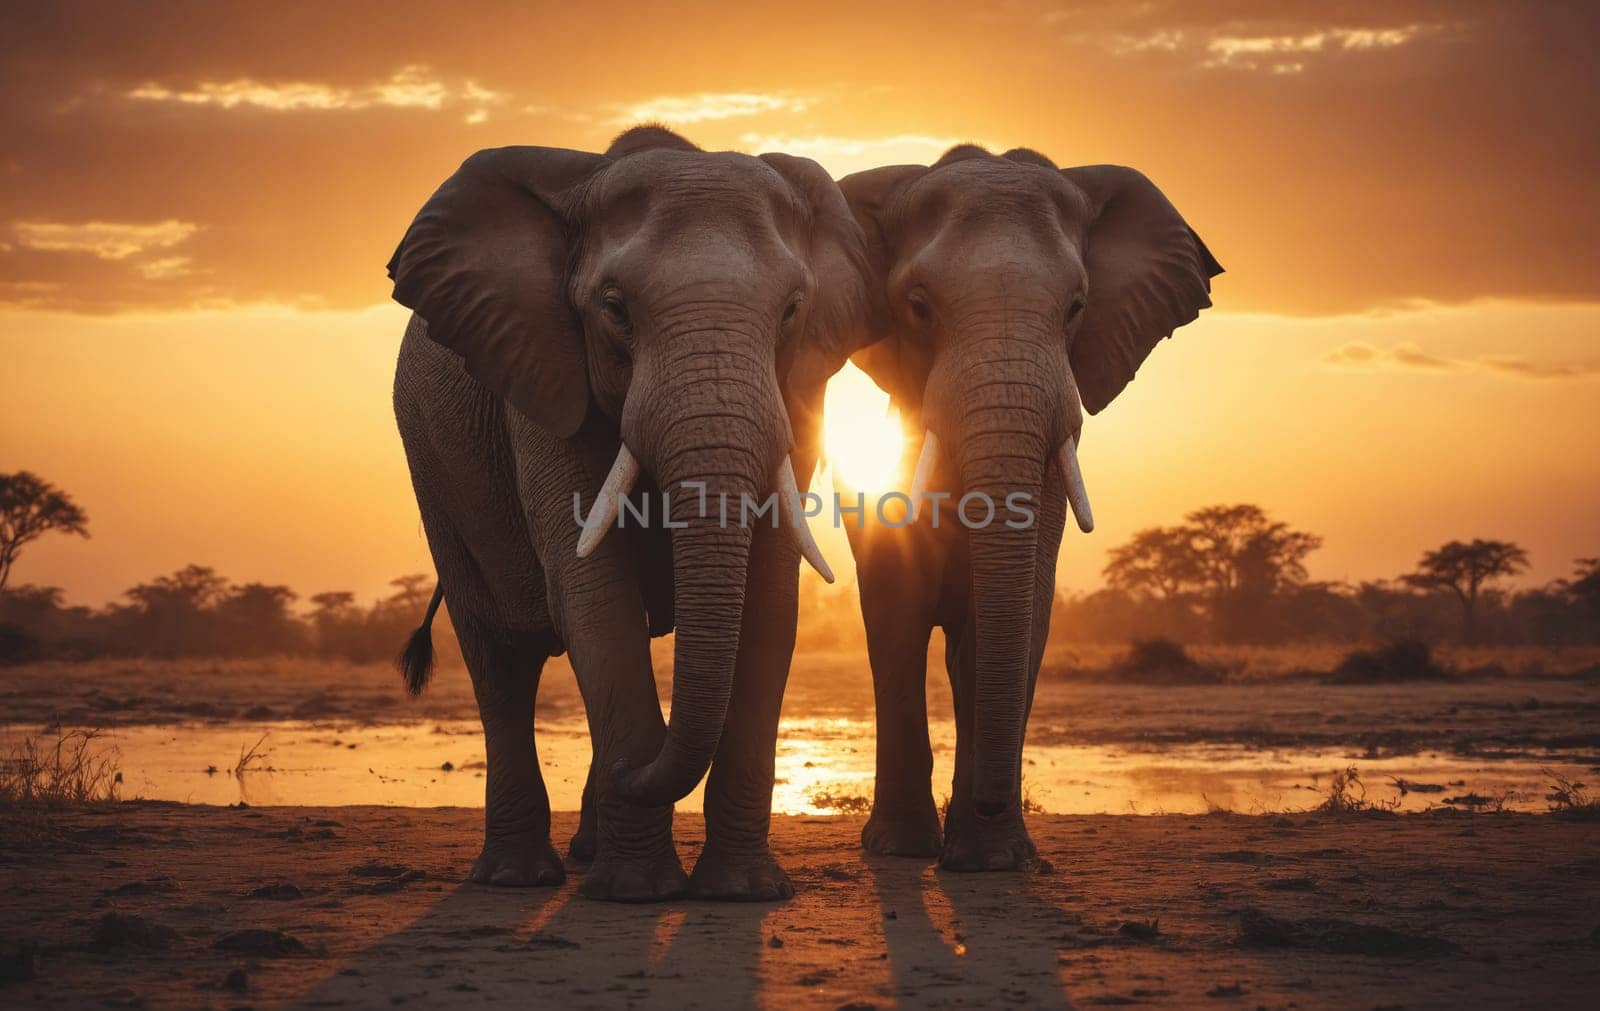 Indian elephant in water puddle at sunset, natures beauty by Andre1ns